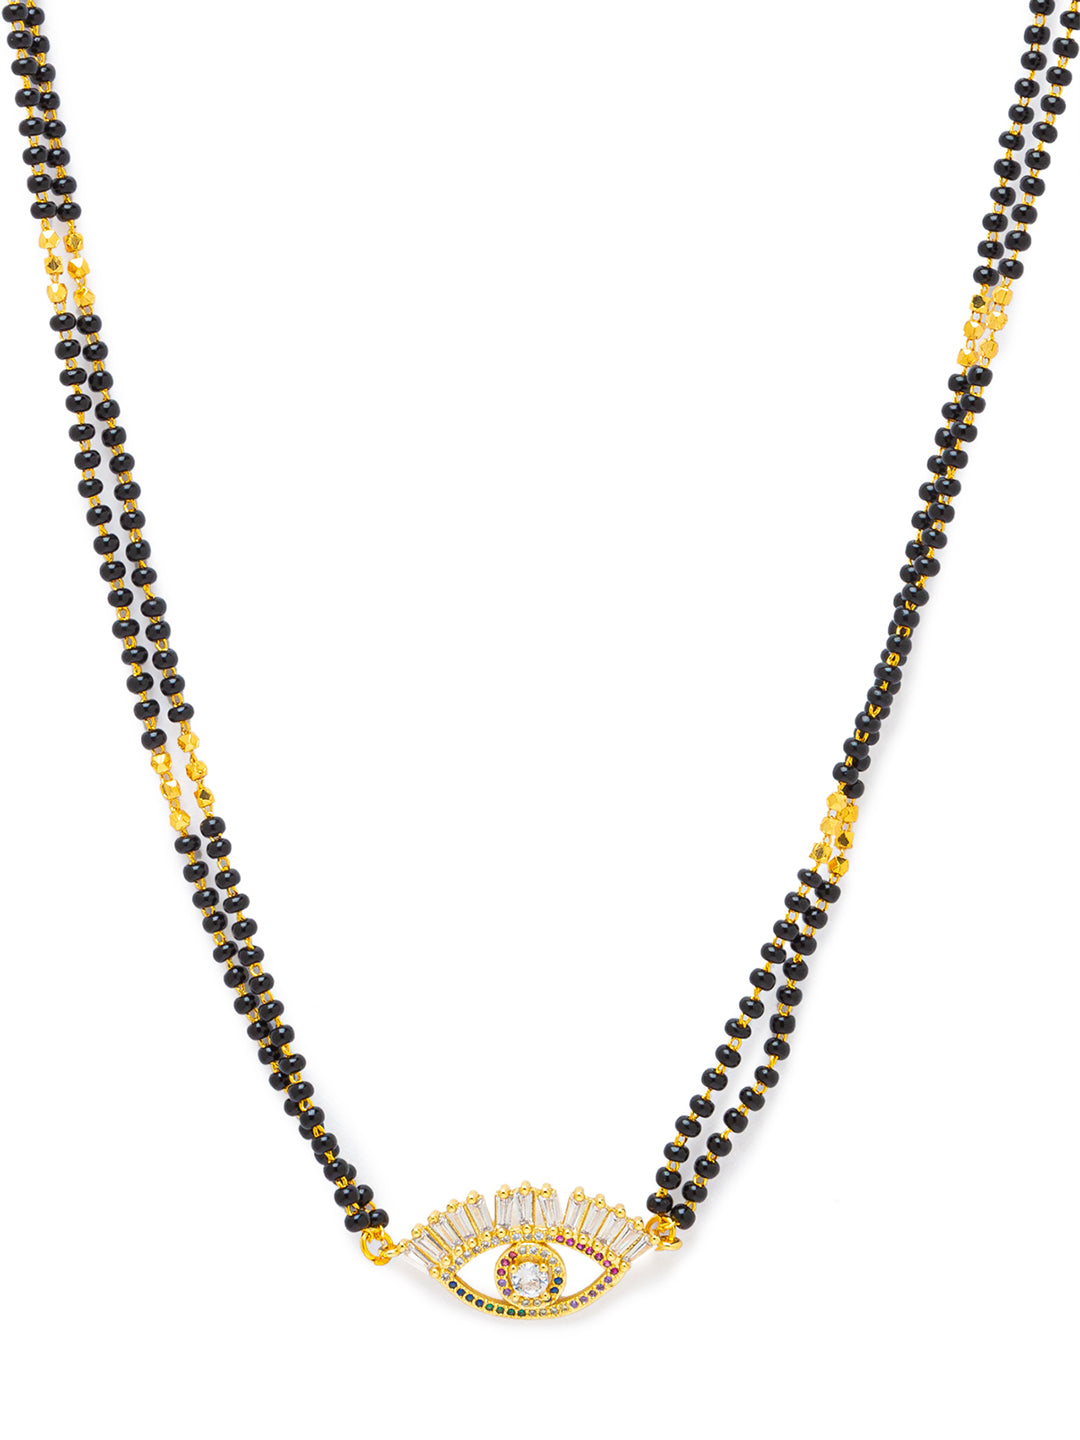 Digital Dress Room Digital Dress Room Diamond Gold Plated Short Mangalsutra मंगलसूत्र Latest Design/Cz Solitaire/Black Beads Chain New Mangalsutra Designs For Women (18 Inches) 